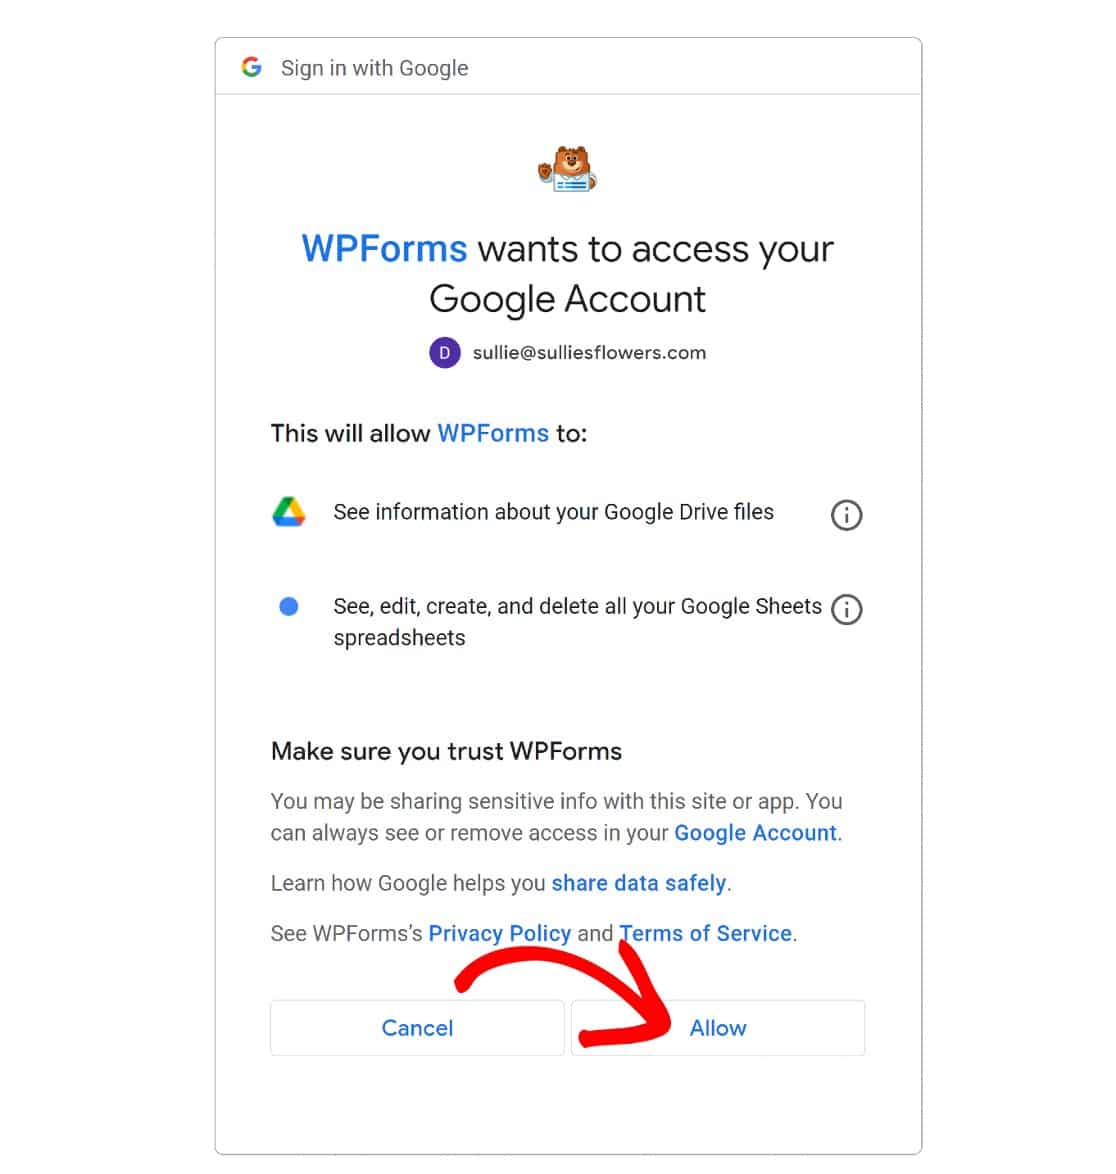 Give WPForms permission to access your Google account and connect to Google Sheets